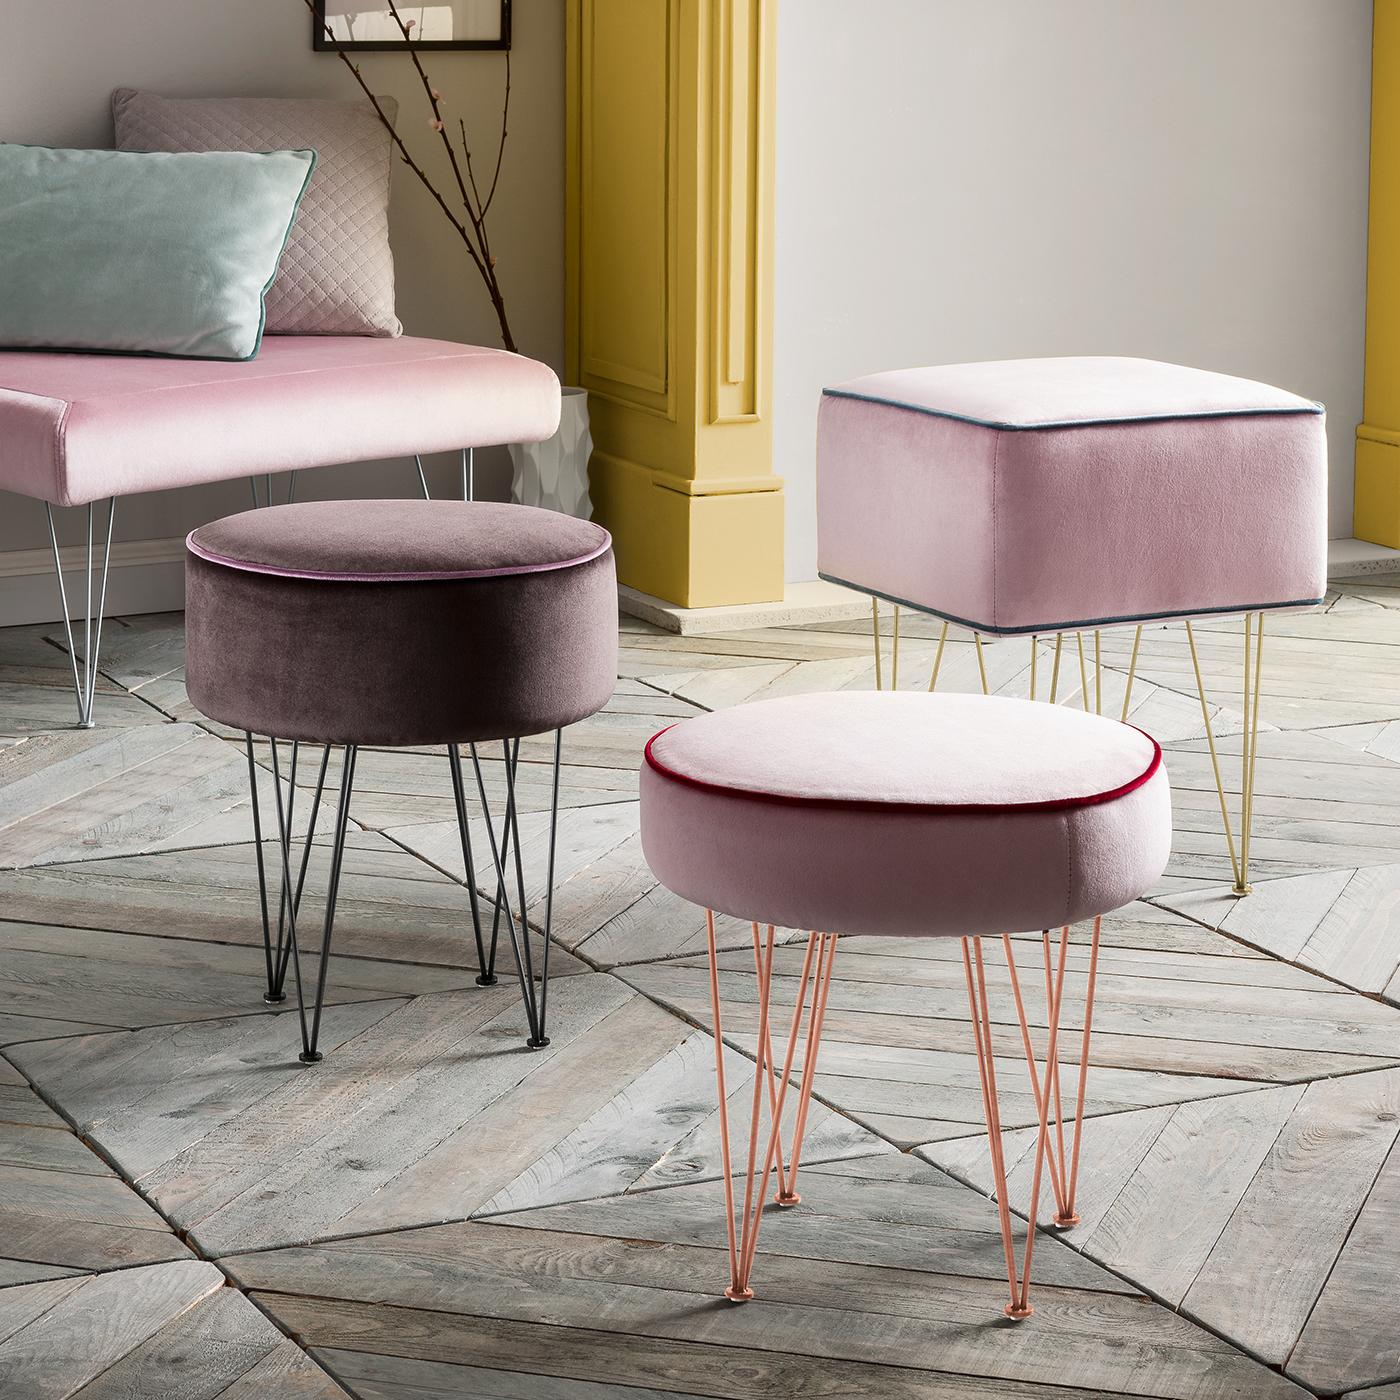 Founded atop four metal hairpin legs in black galvanized finish, this exquisite pouf  boasts a bold circular top covered in white polyamide velour for a minimalist and mid-century modern look that will enliven any interior. The fir, pine, and poplar